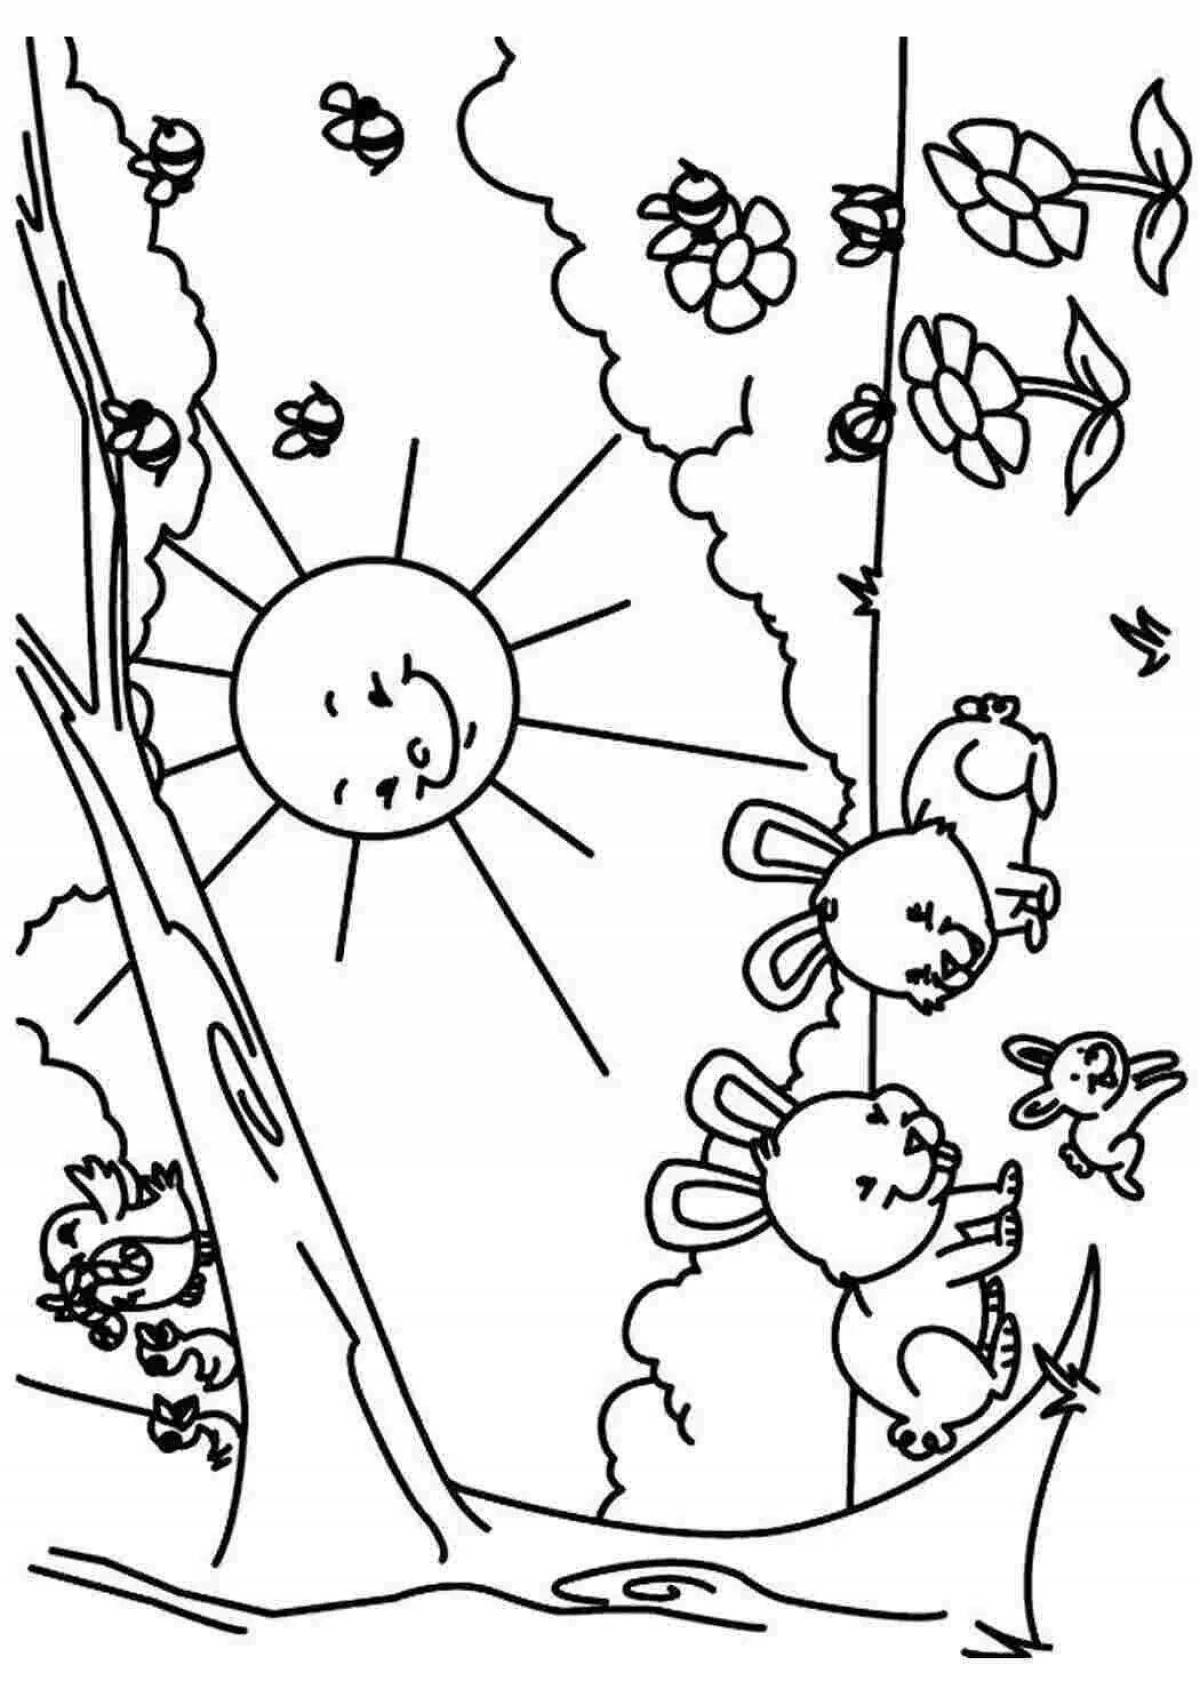 Charming summer coloring book